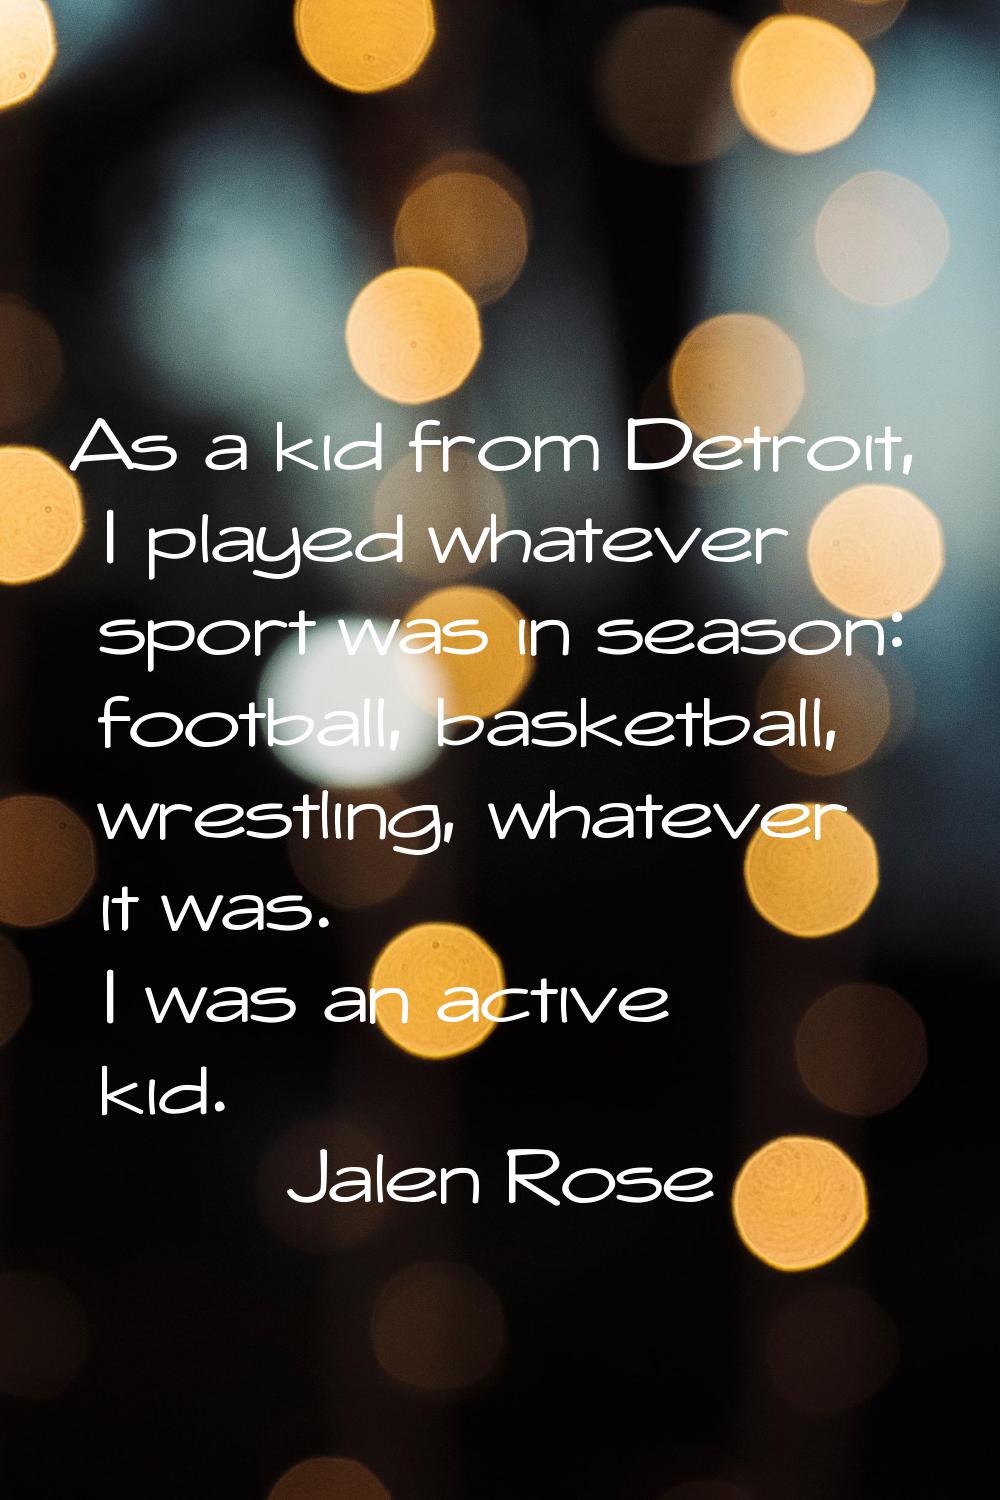 As a kid from Detroit, I played whatever sport was in season: football, basketball, wrestling, what